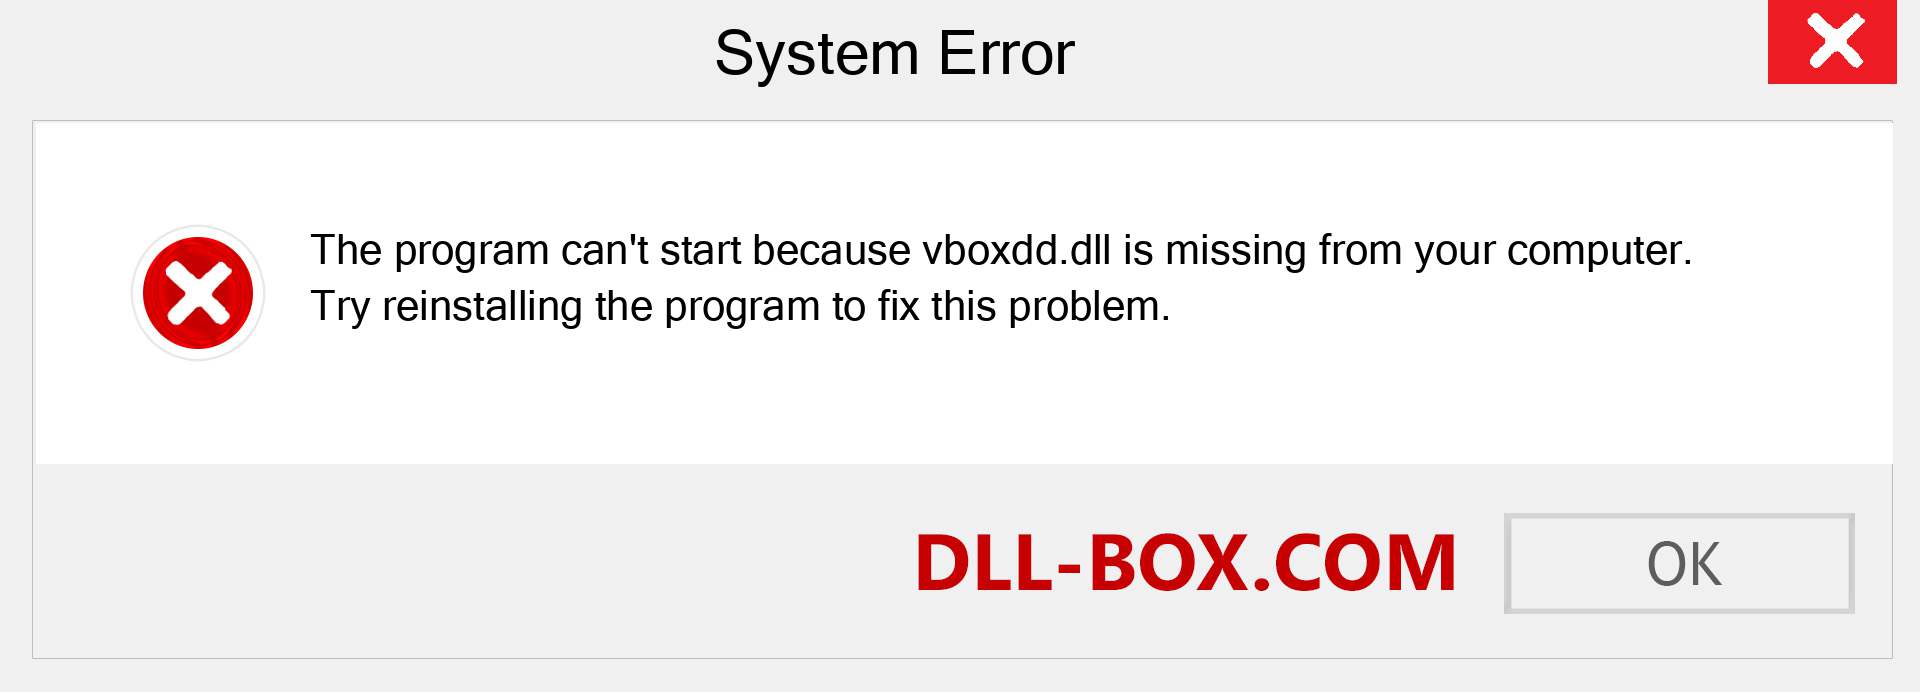  vboxdd.dll file is missing?. Download for Windows 7, 8, 10 - Fix  vboxdd dll Missing Error on Windows, photos, images